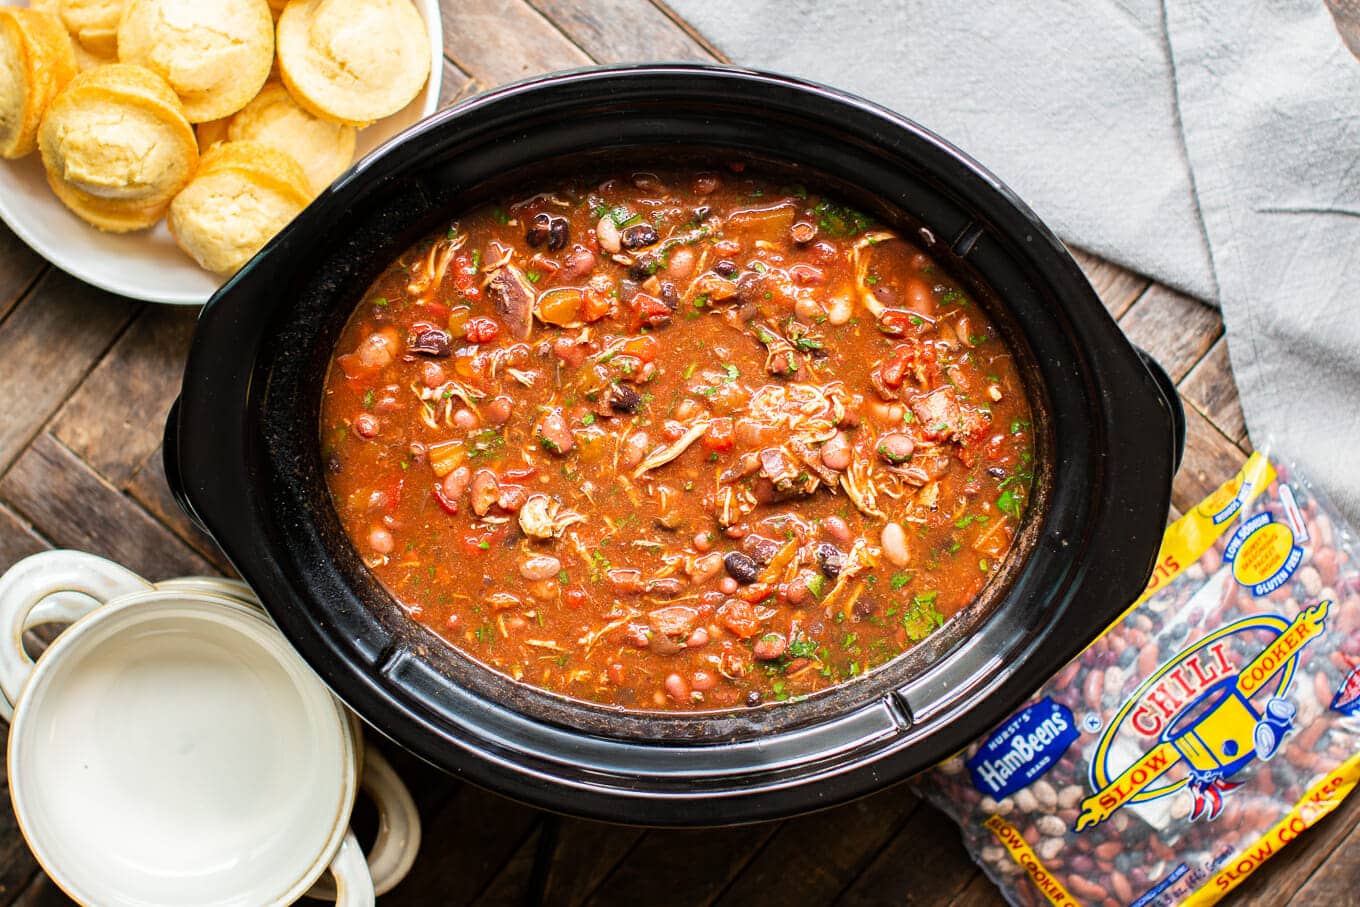 chicken chili in slow cooker with cornbread muffins on the side.